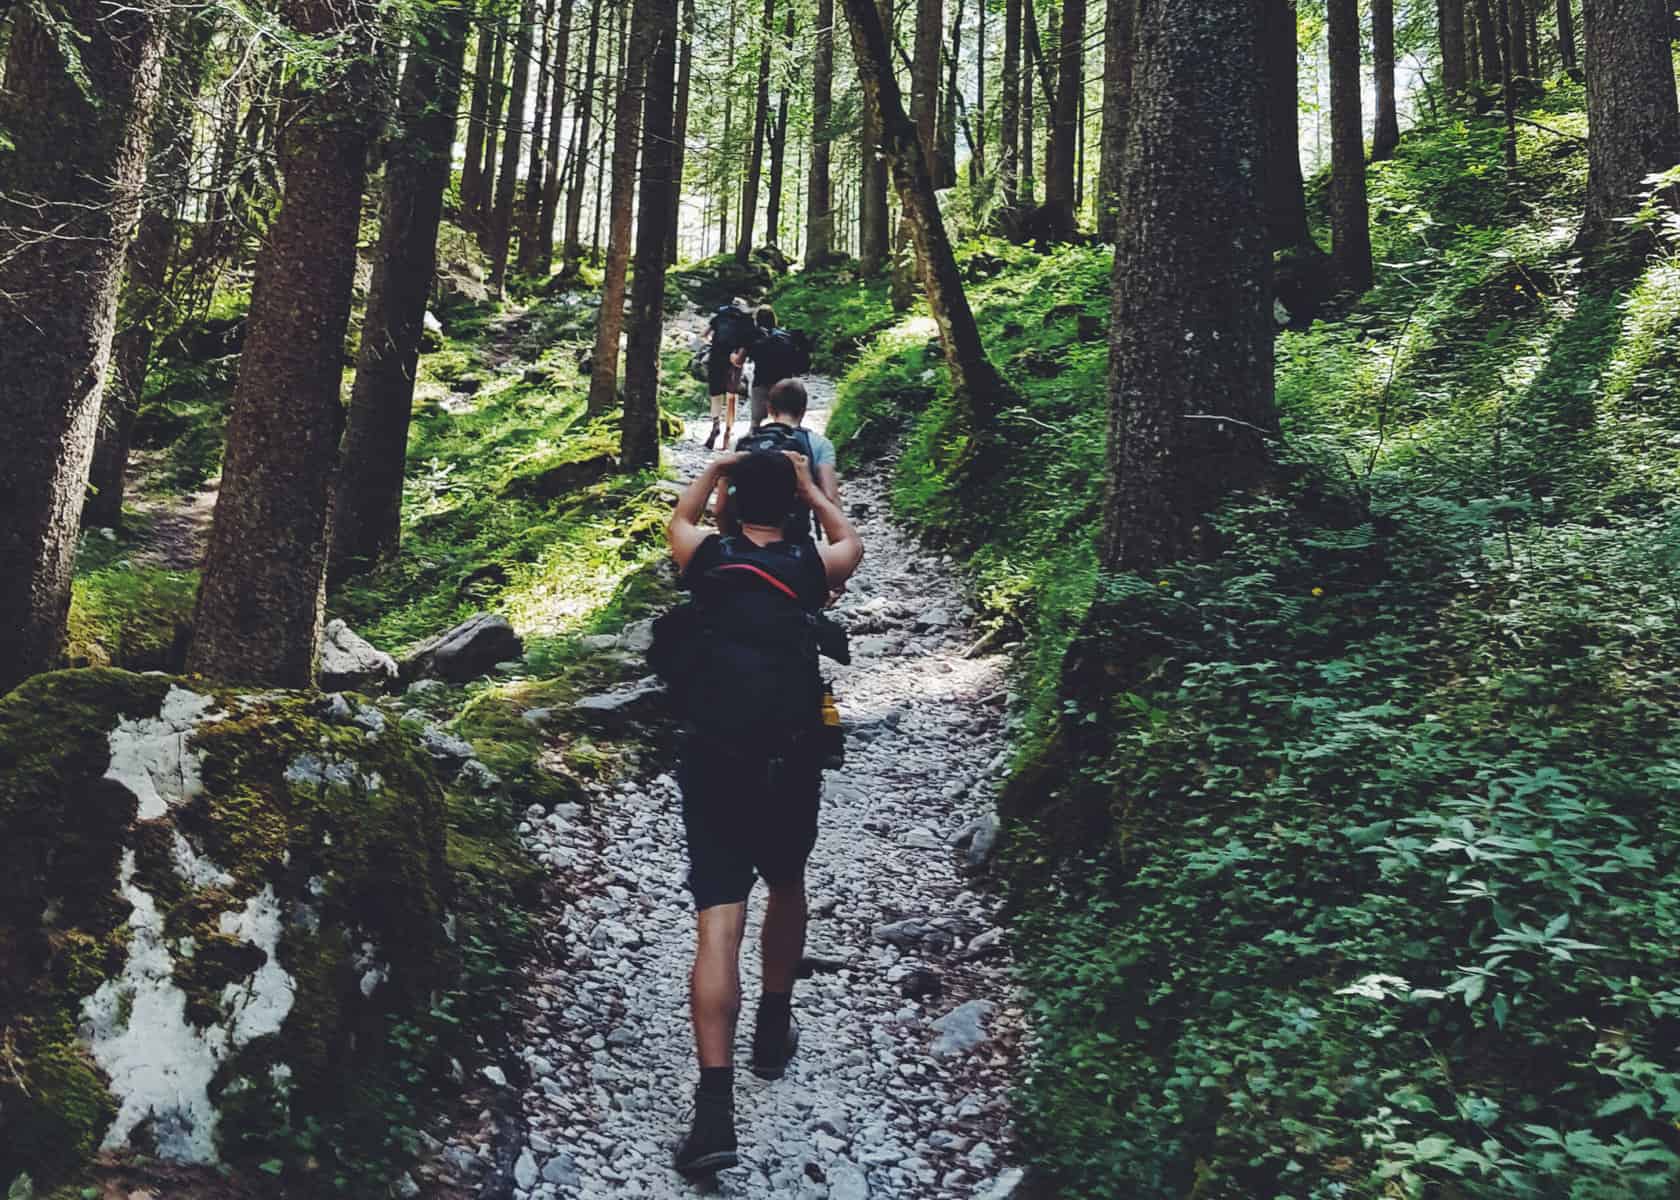 People are shown in low light walking away from the camera on a forest trail.